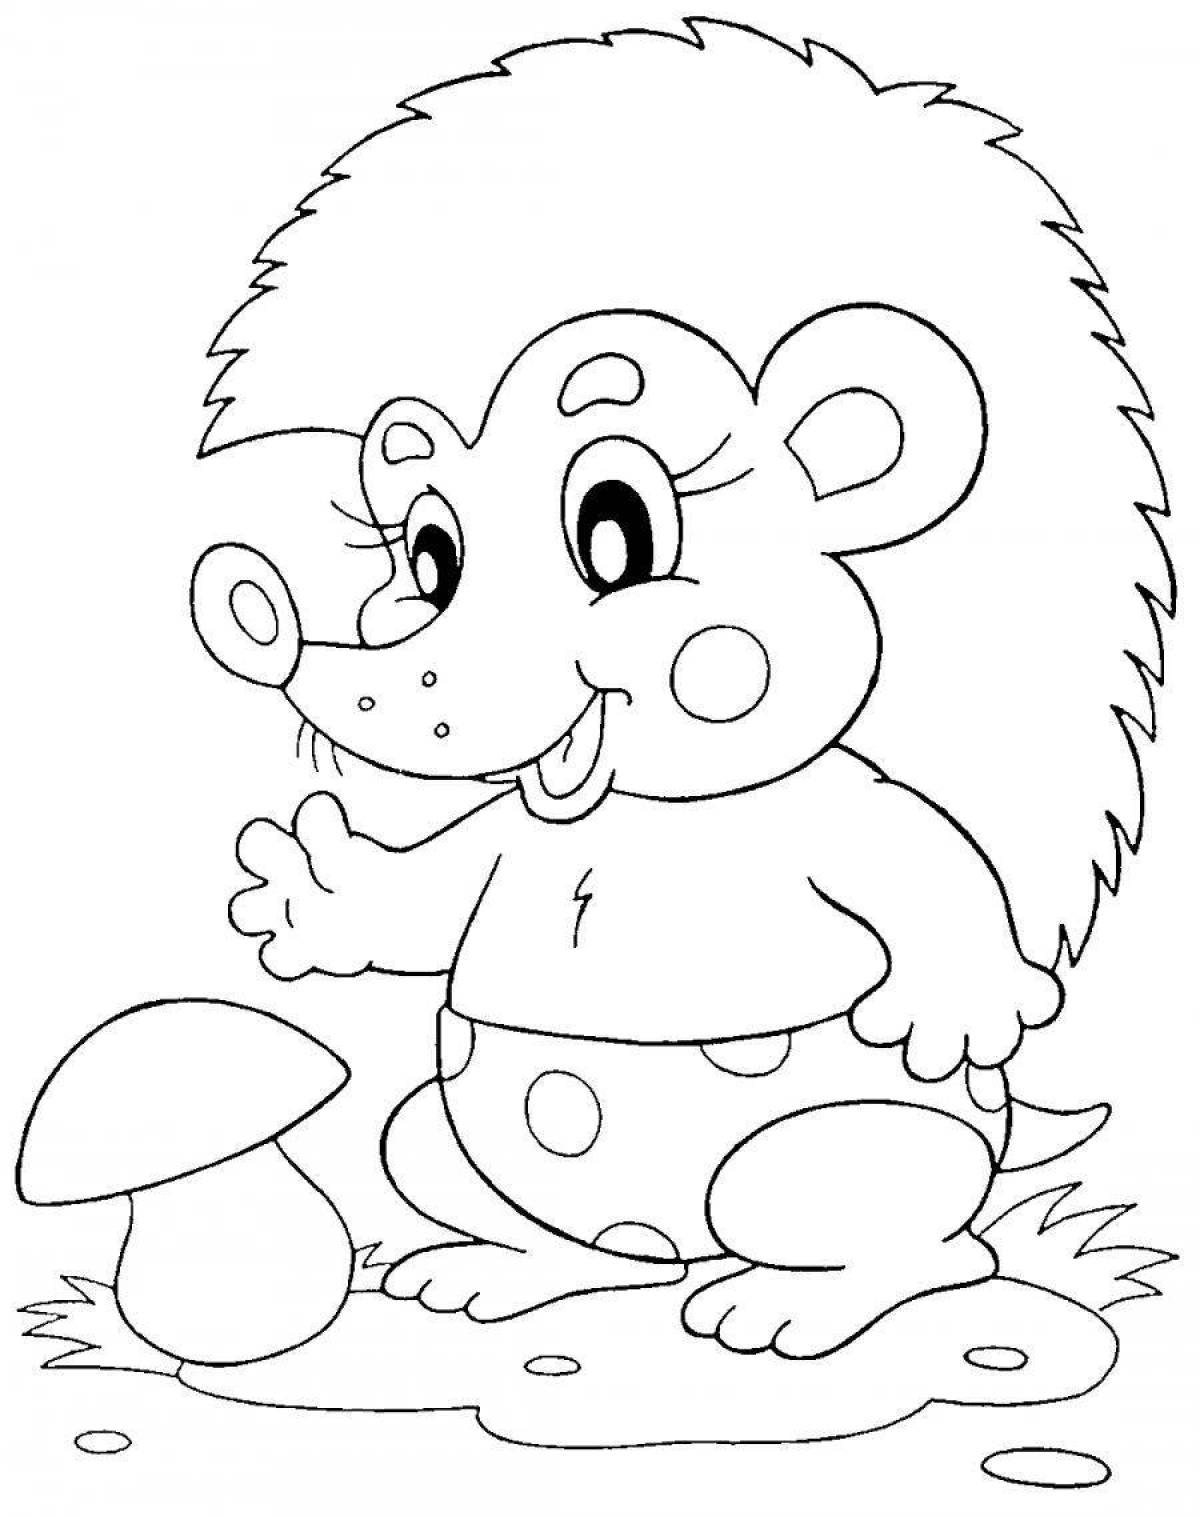 Fun coloring book for the smallest animals